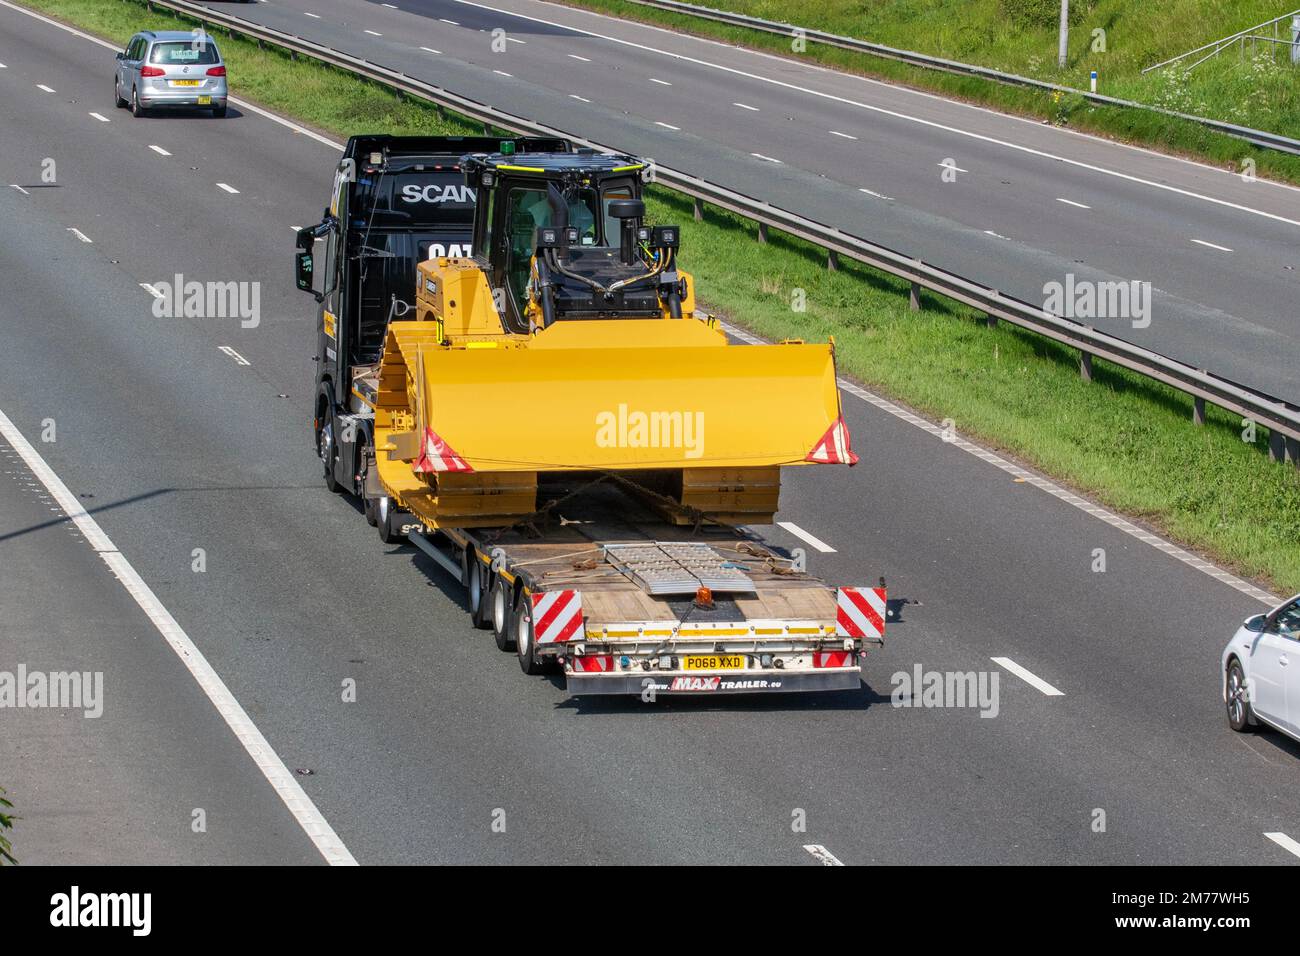 2018 Black SCANIA LORRY S500 A 6X2/2 12742cc Diesel truck carrying new Bulldozer on a low loader MAX trailer; travelling on the M6 motorway, UK Stock Photo